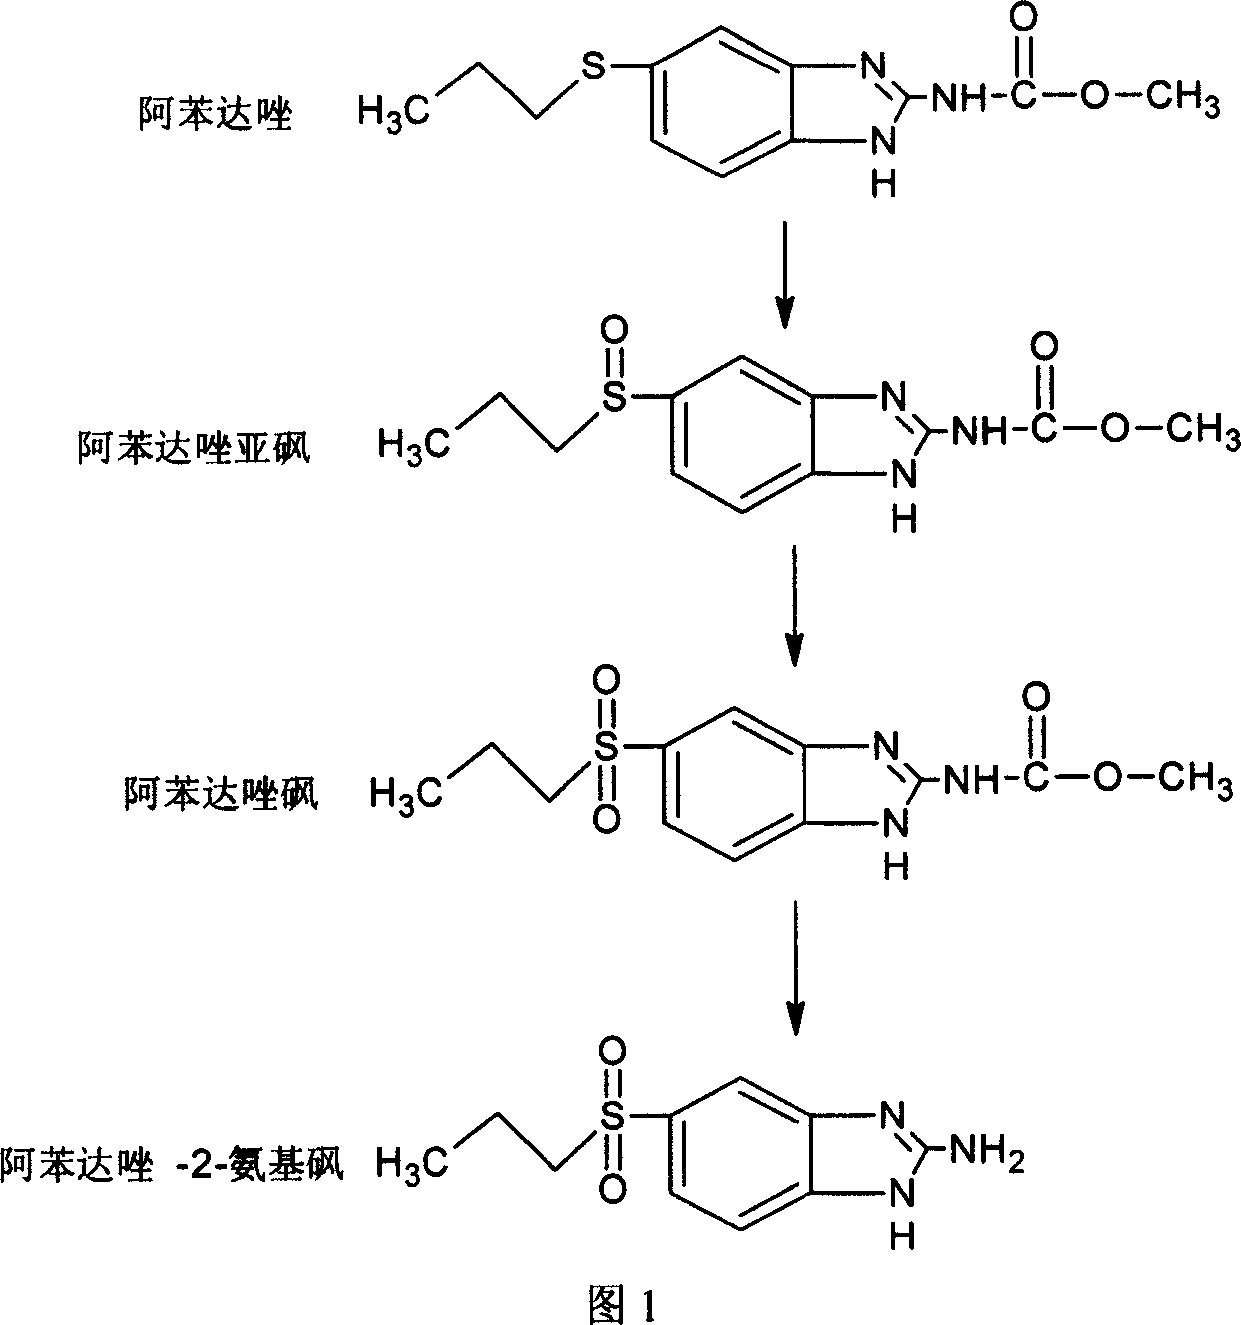 Chemical synthesis of albendazole-sulfoxide